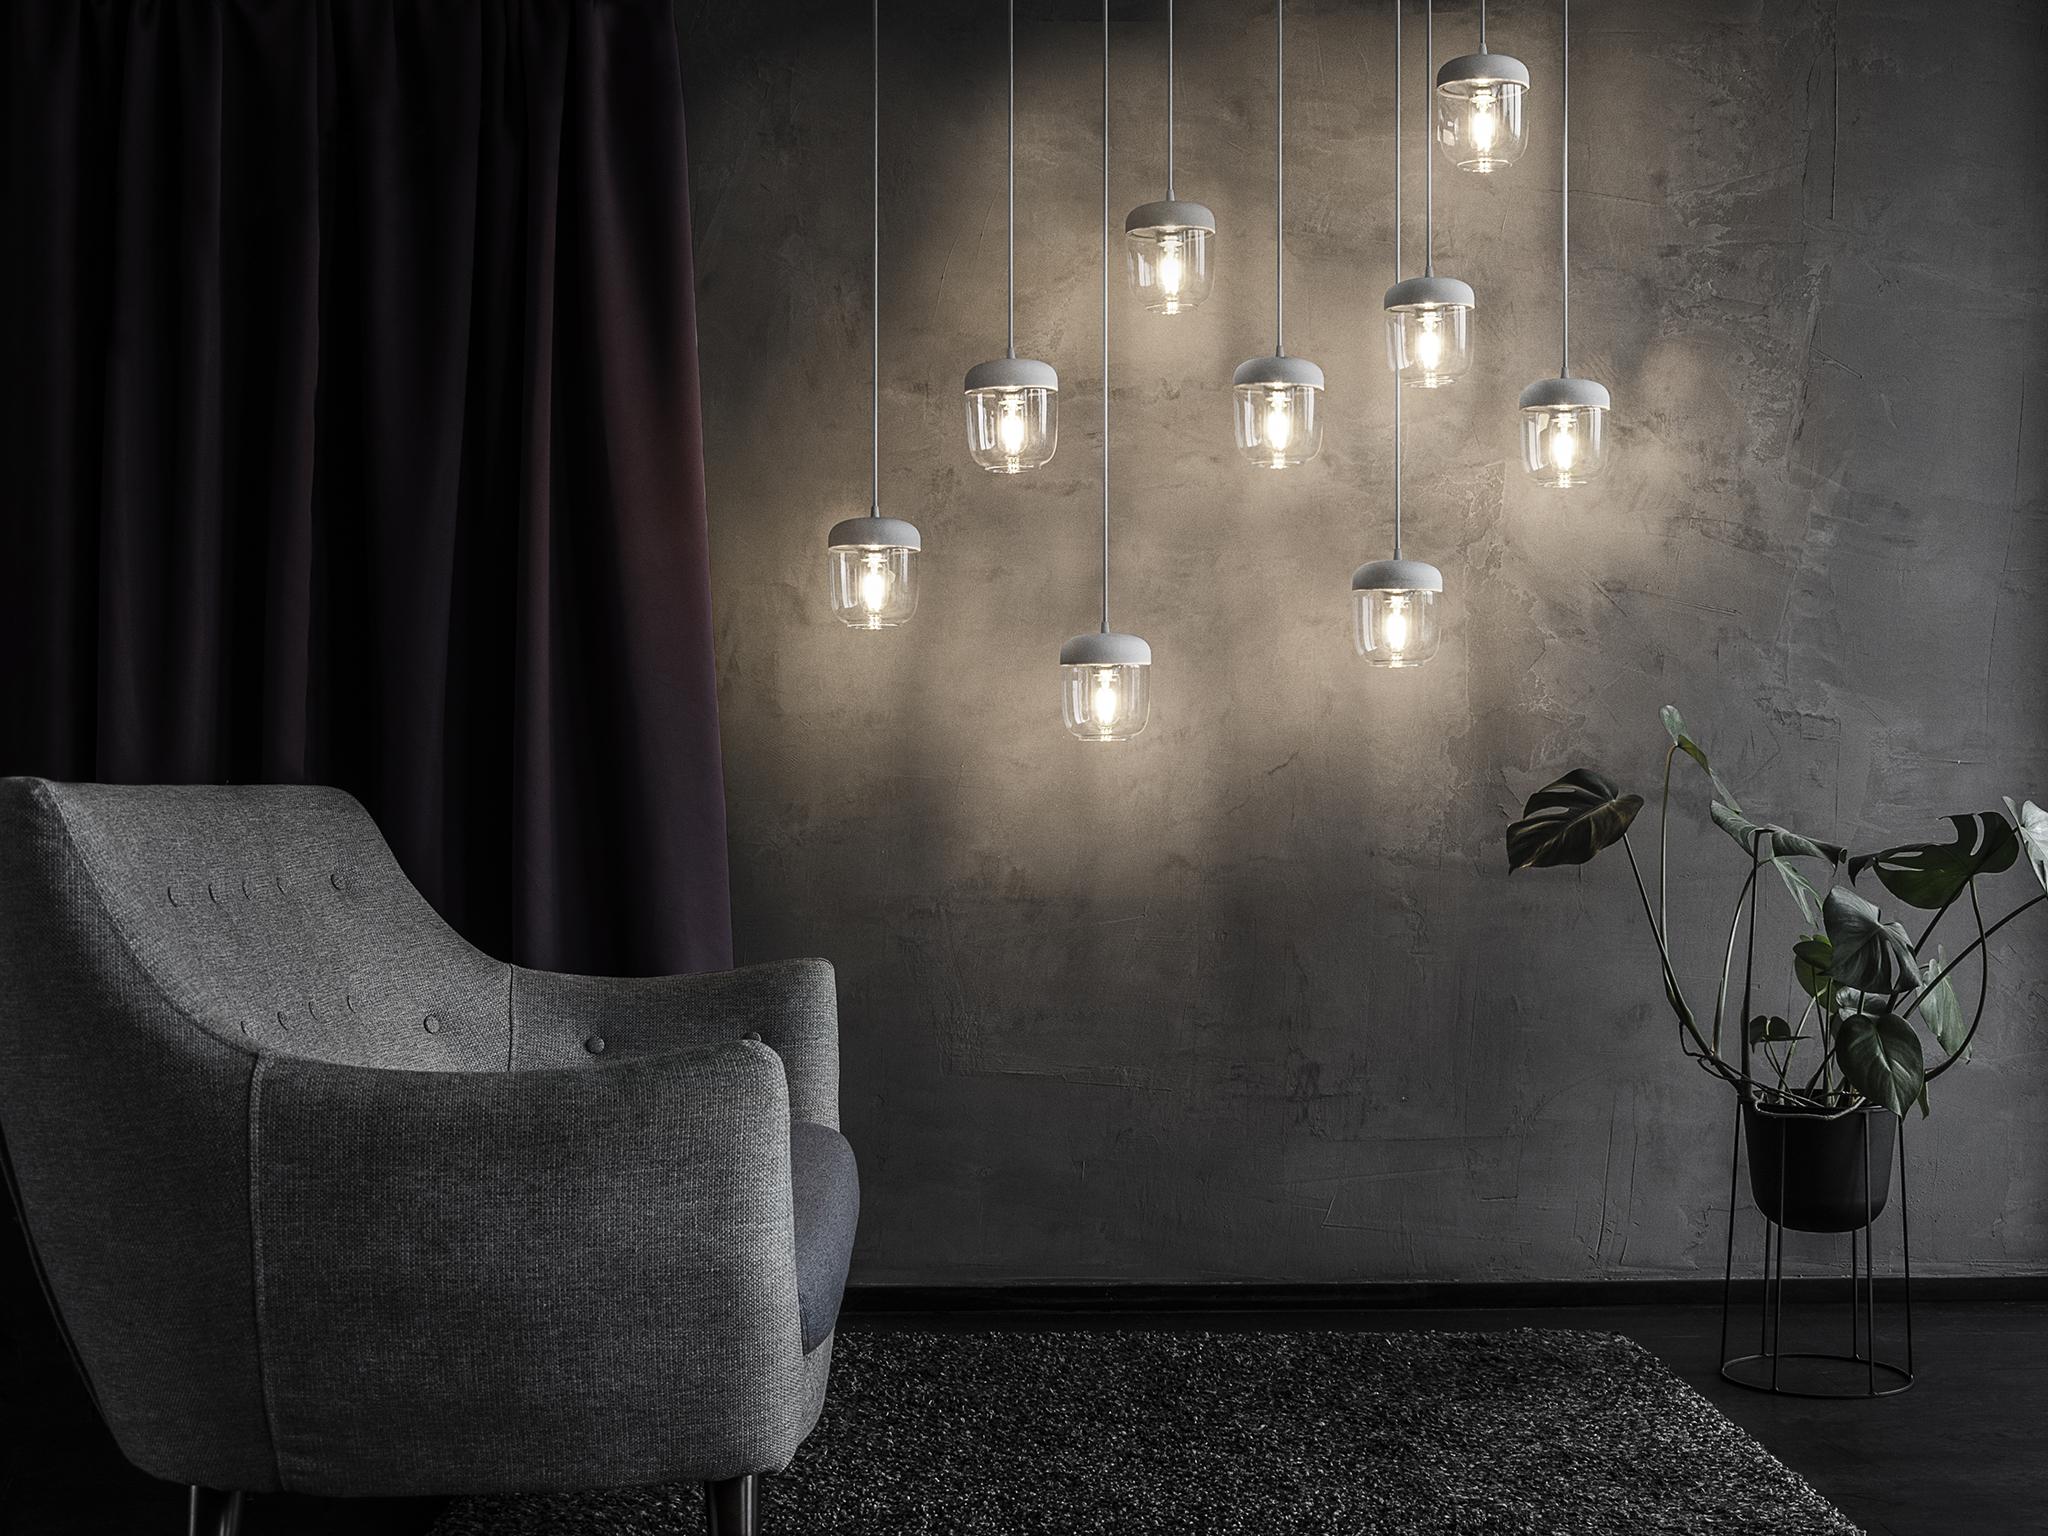 Pendant lights were a highlight at this year’s Design Week